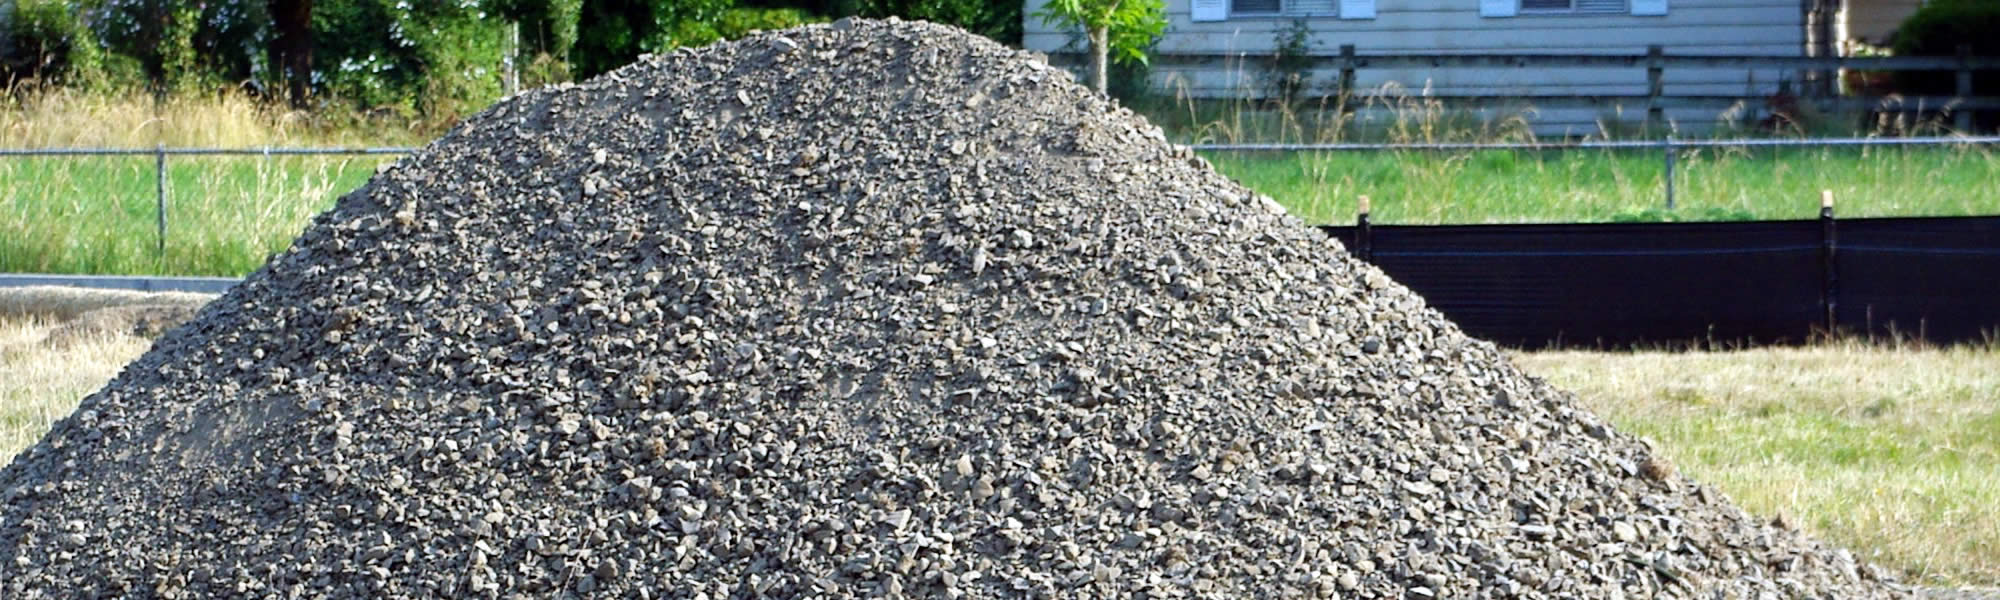 Pulaski Gravel and Dirt Delivery Services near me